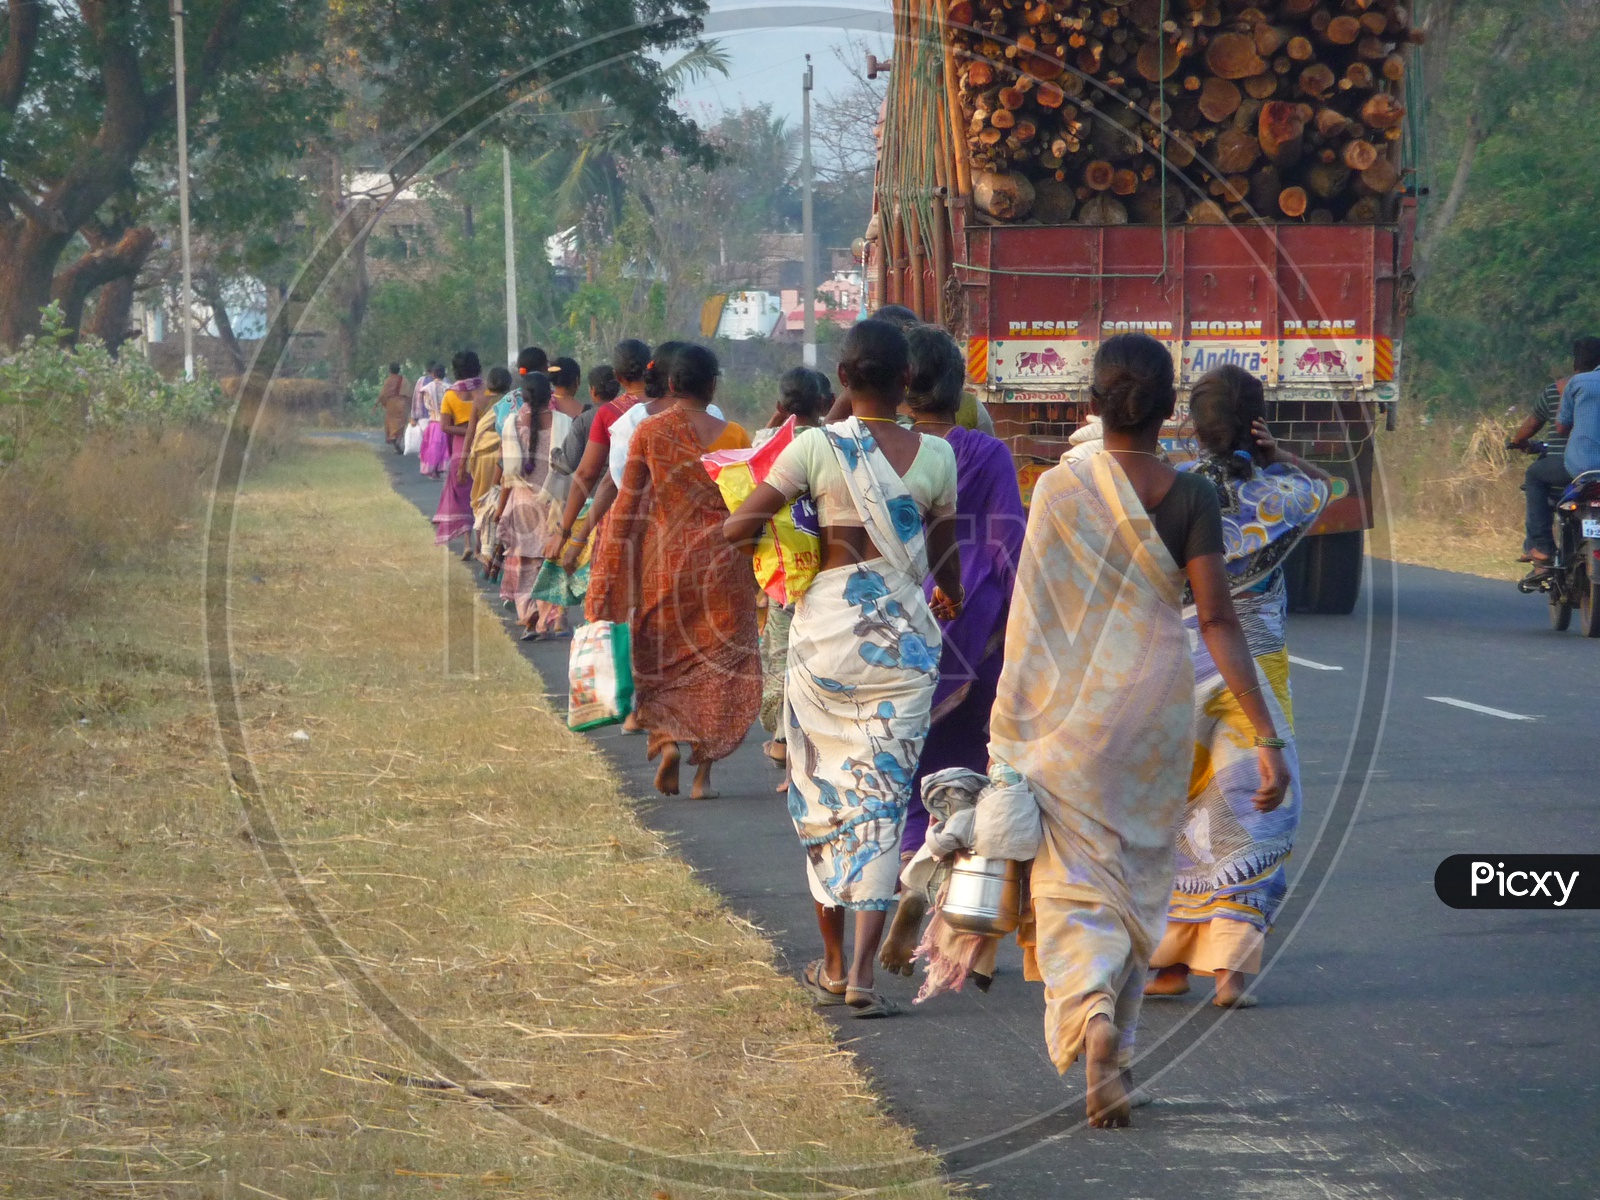 Women going to home after completion of work